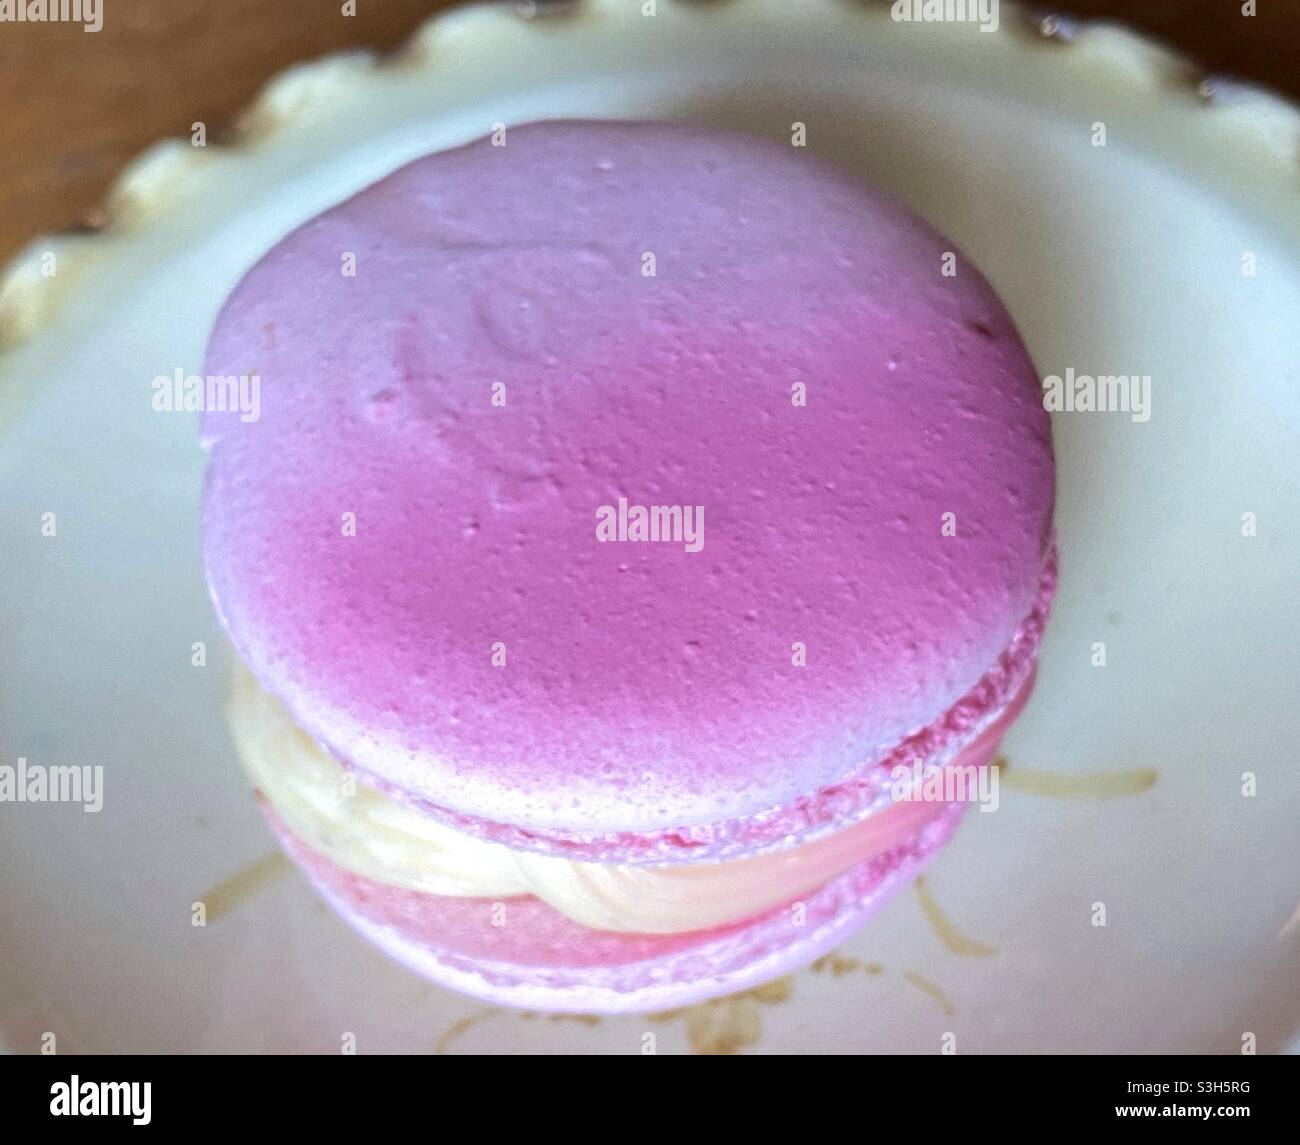 Macaron in pink colour on a vintage saucer Stock Photo